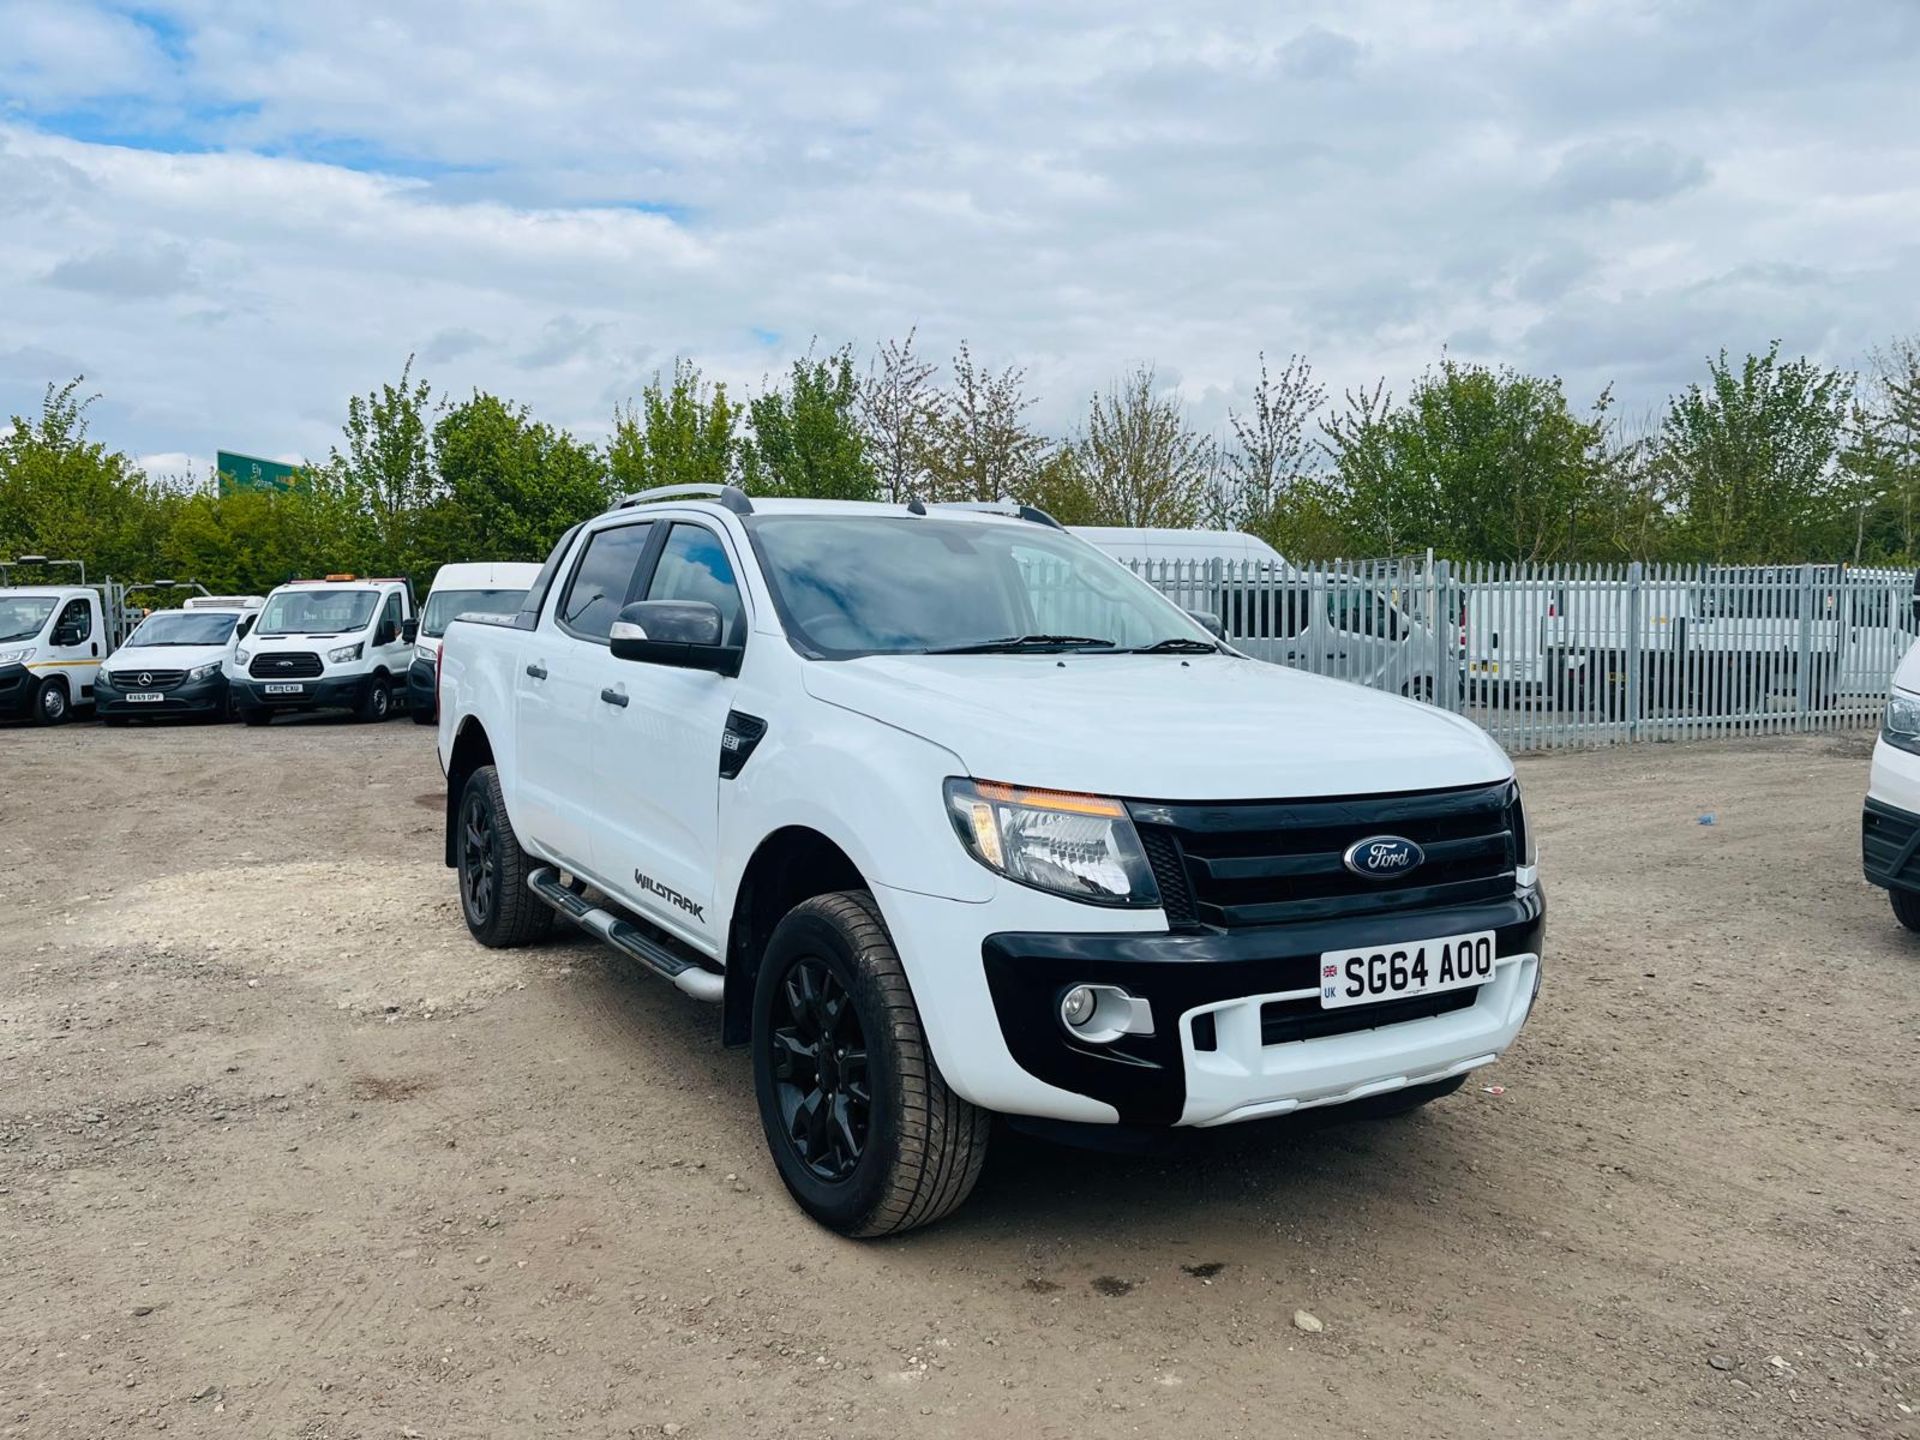 ** ON SALE ** Ford Ranger Wildtrak 3.2 TDCI 200 Automatic 2014 '64 Reg' 4WD - A/C - No Vat - Image 2 of 33